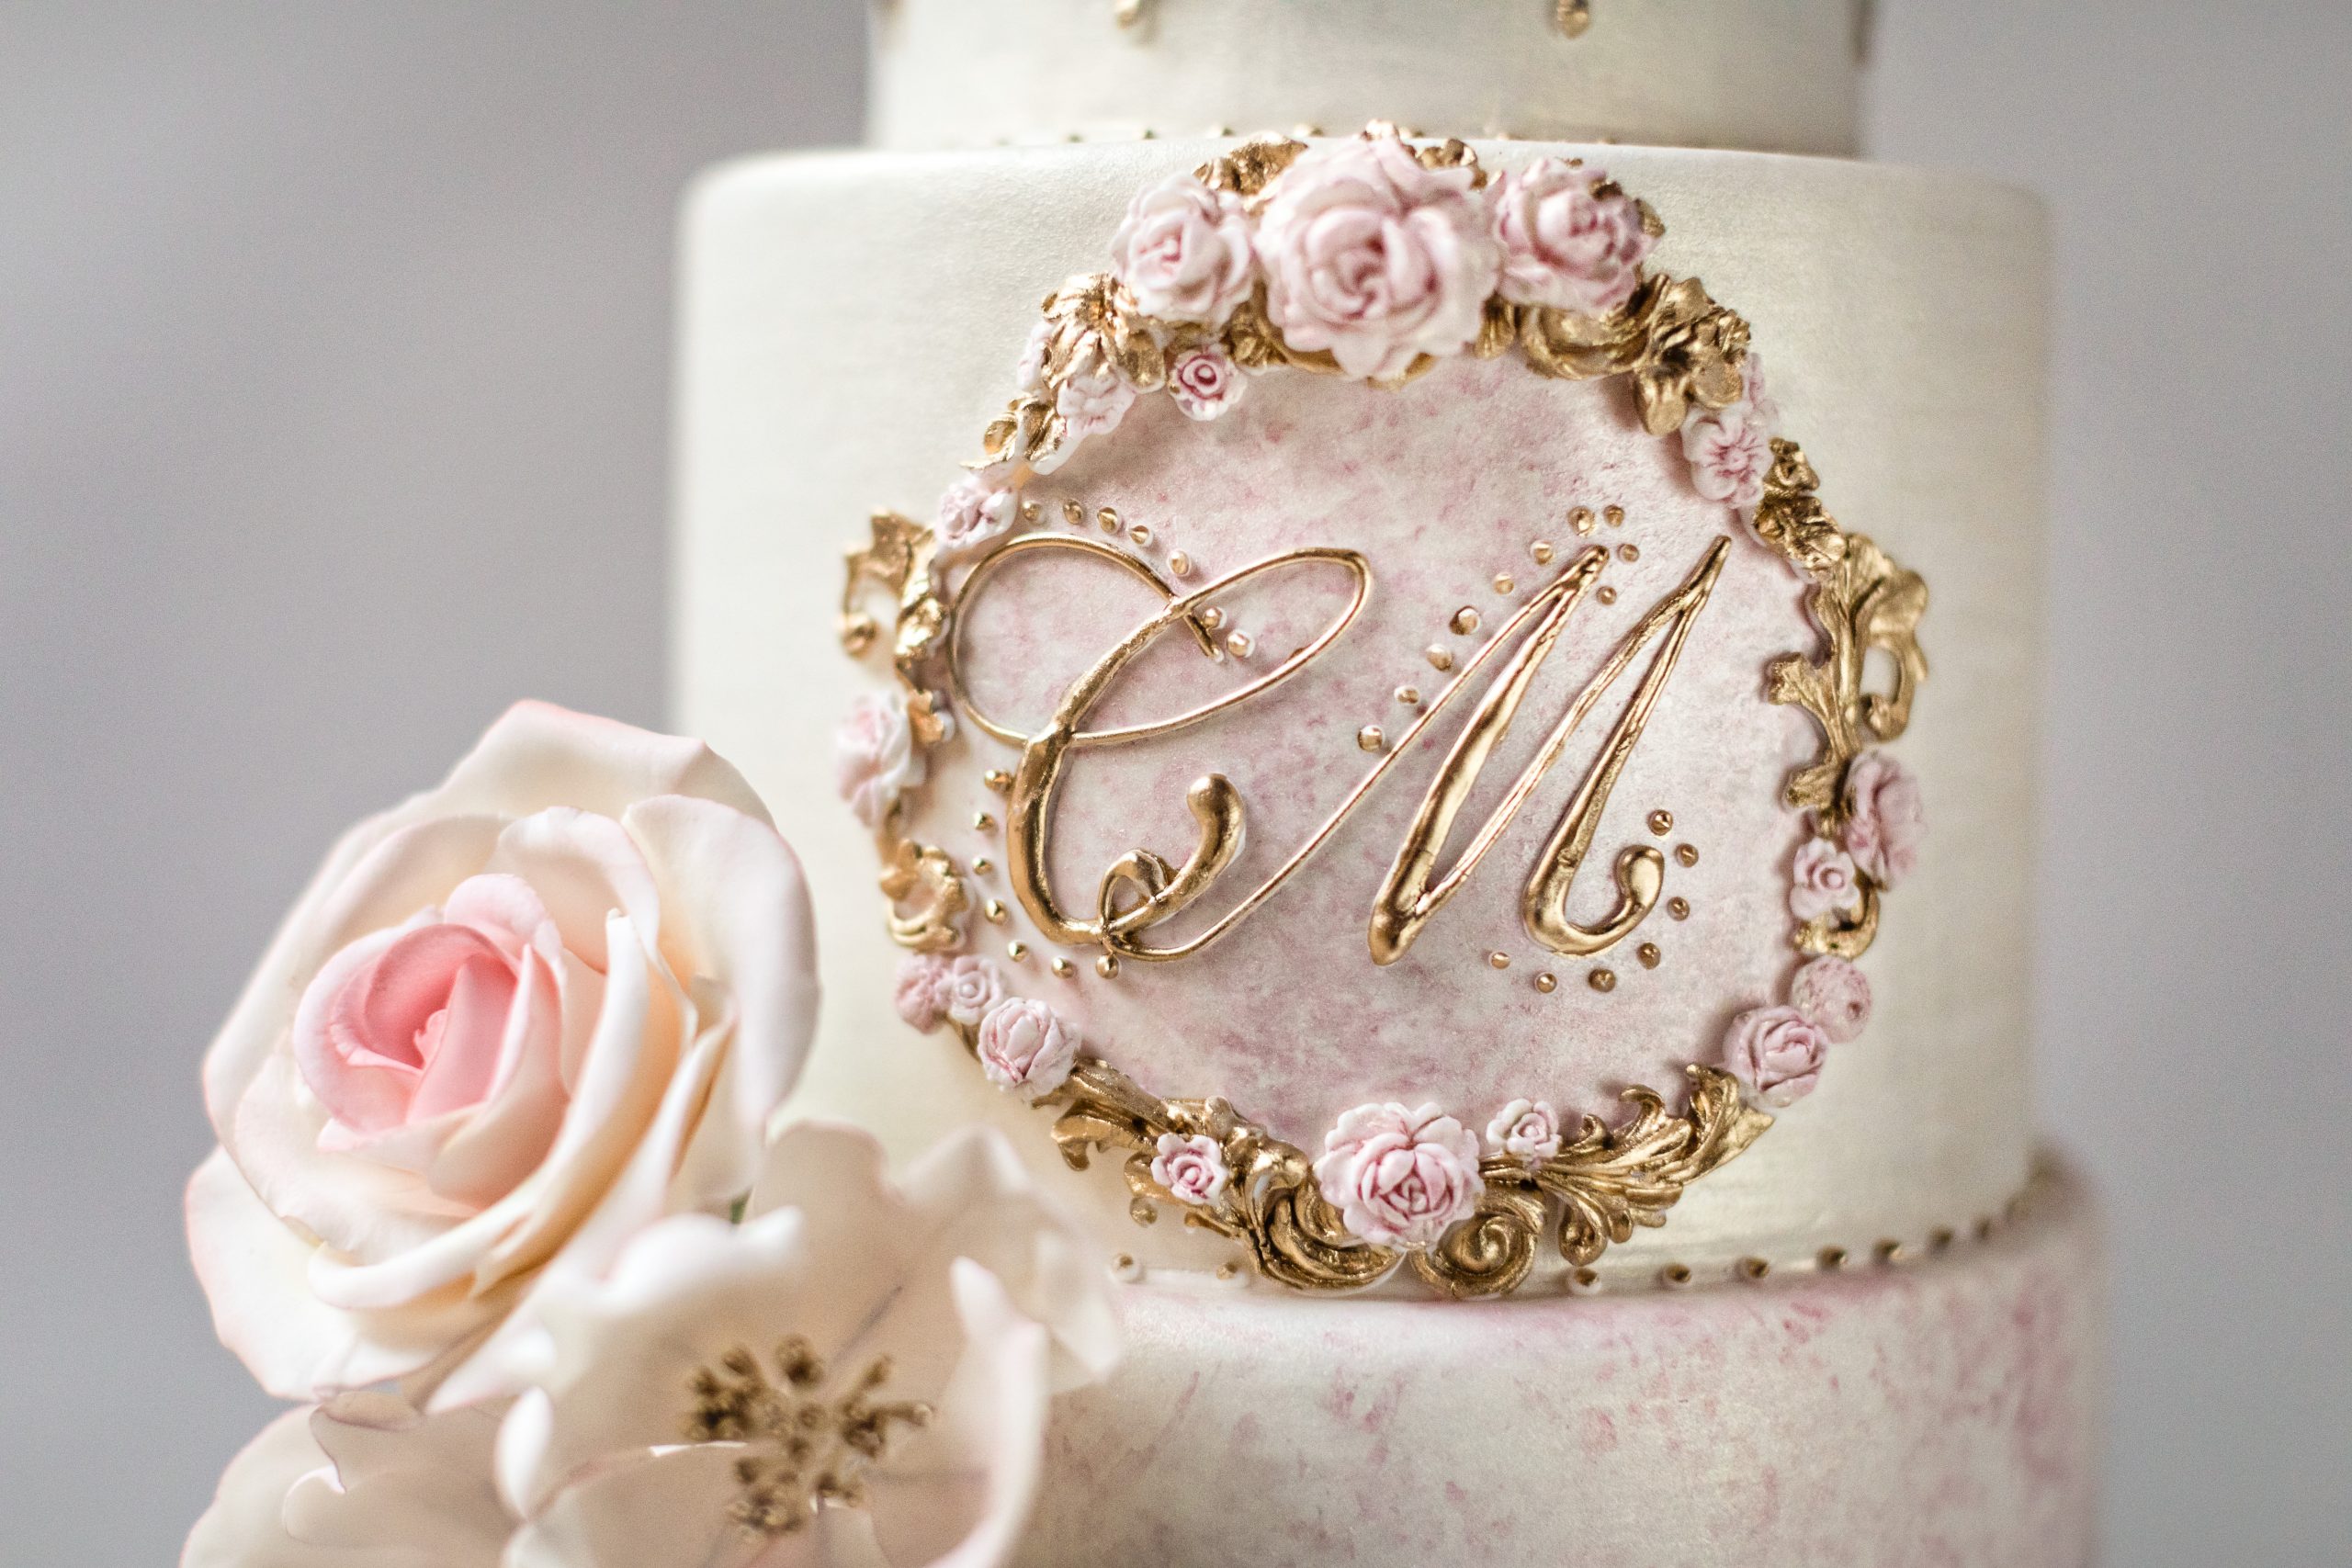 Exquisite wedding cake with custom monogram, gold and pink details and sugar roses. Best Wedding Cakes in Connecticut by Master Sugar Artist Ana Parzych